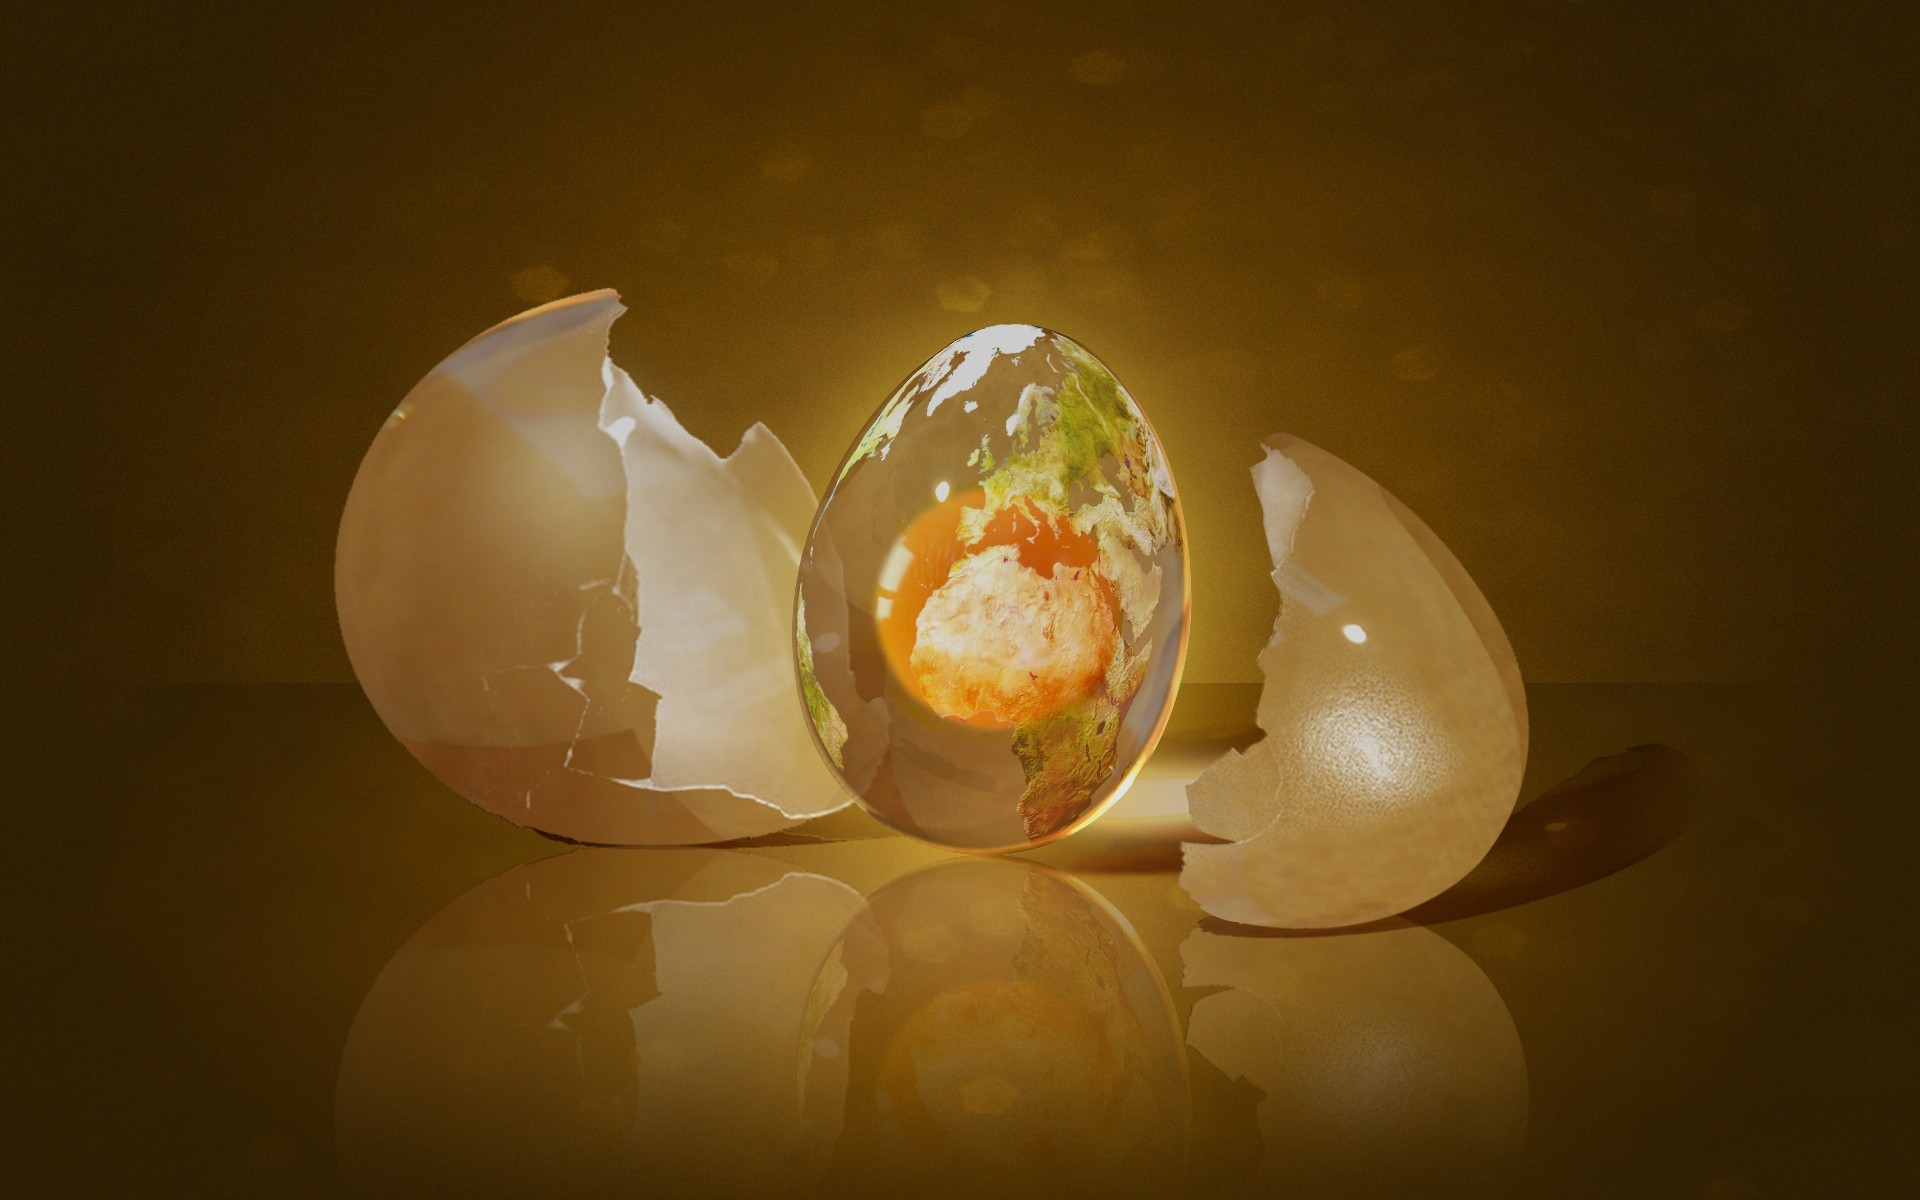 Digital Art Eggs Fire Reflection Africa Europe Continents Yellow 1920x1200